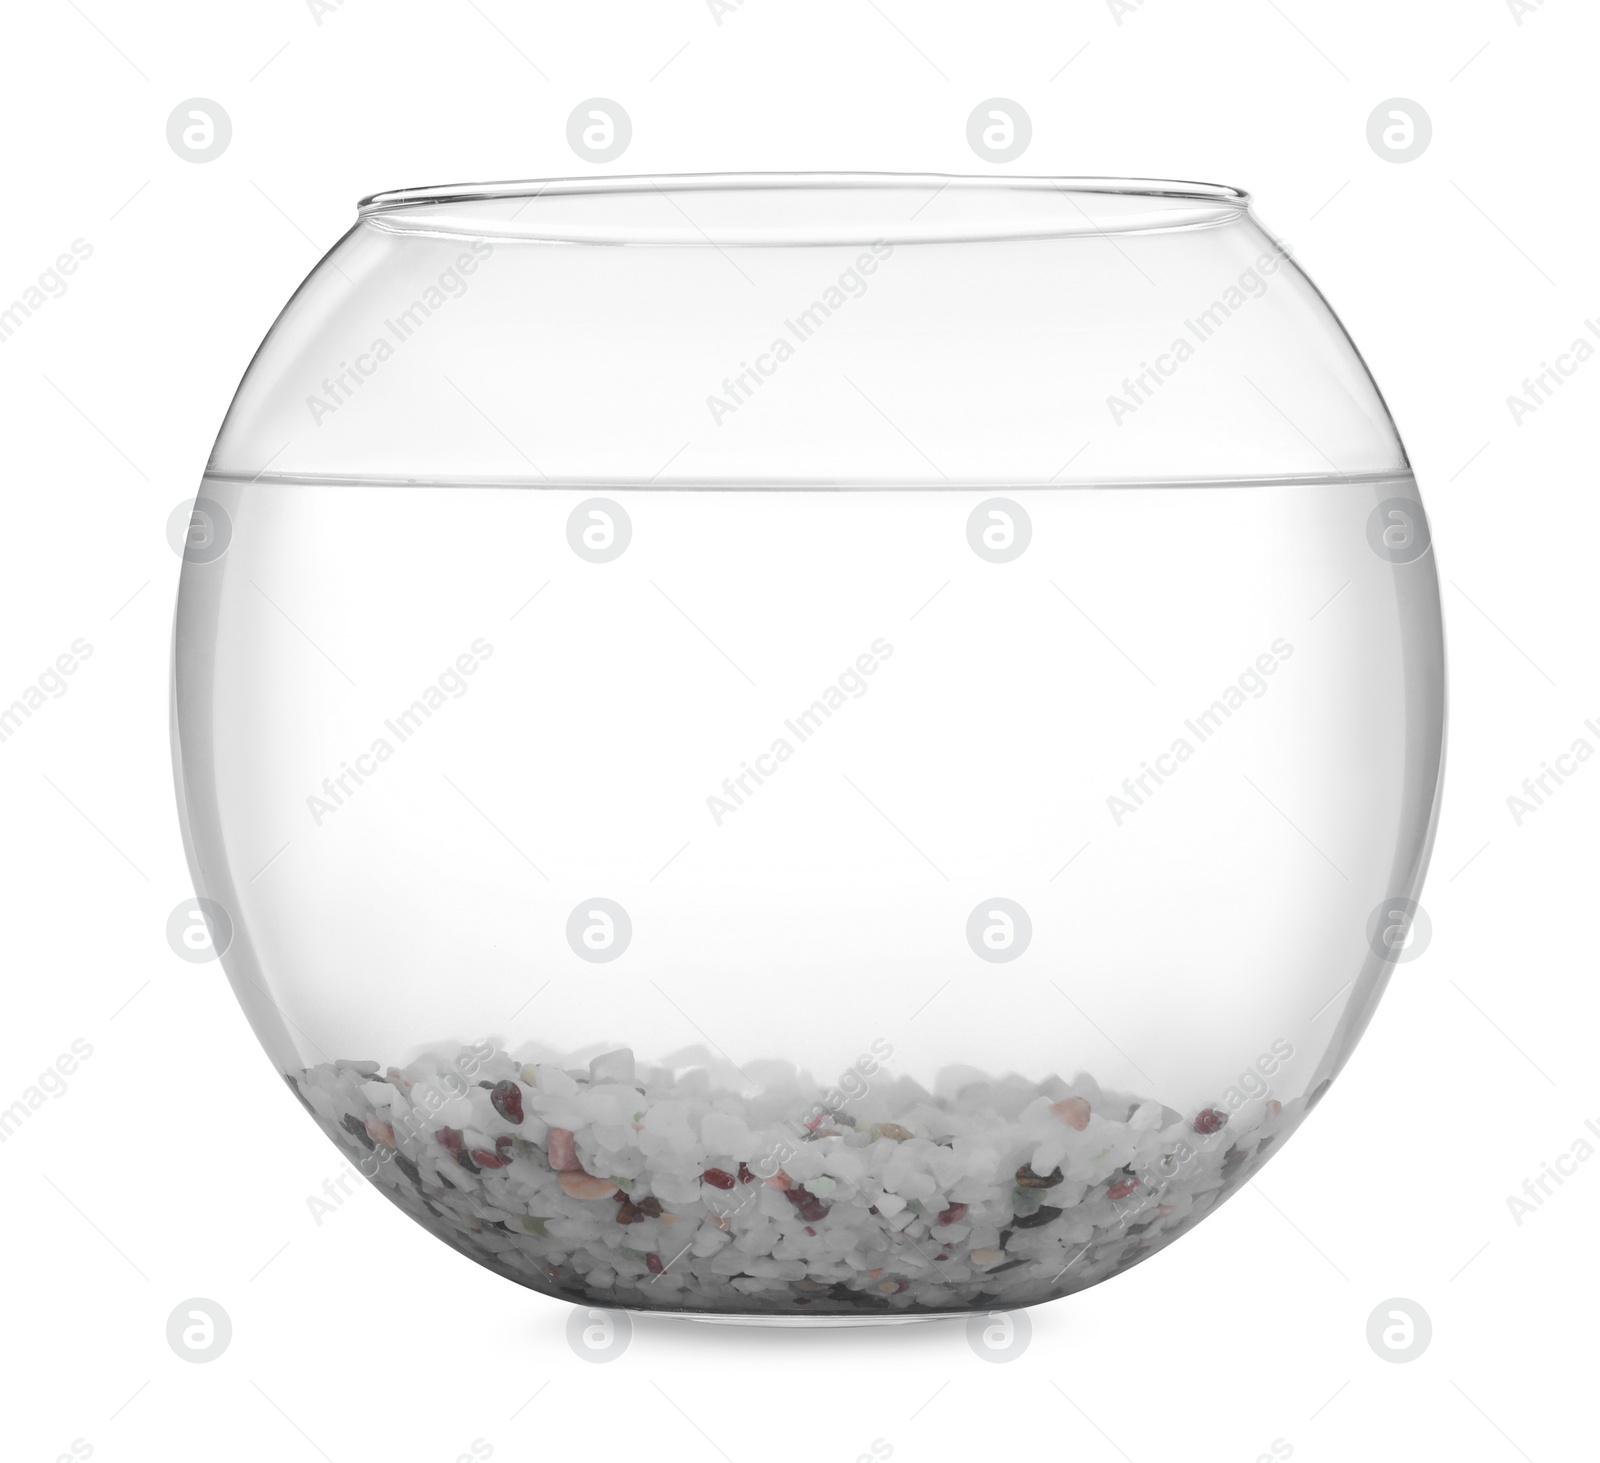 Photo of Glass fish bowl with clear water and decorative pebble isolated on white